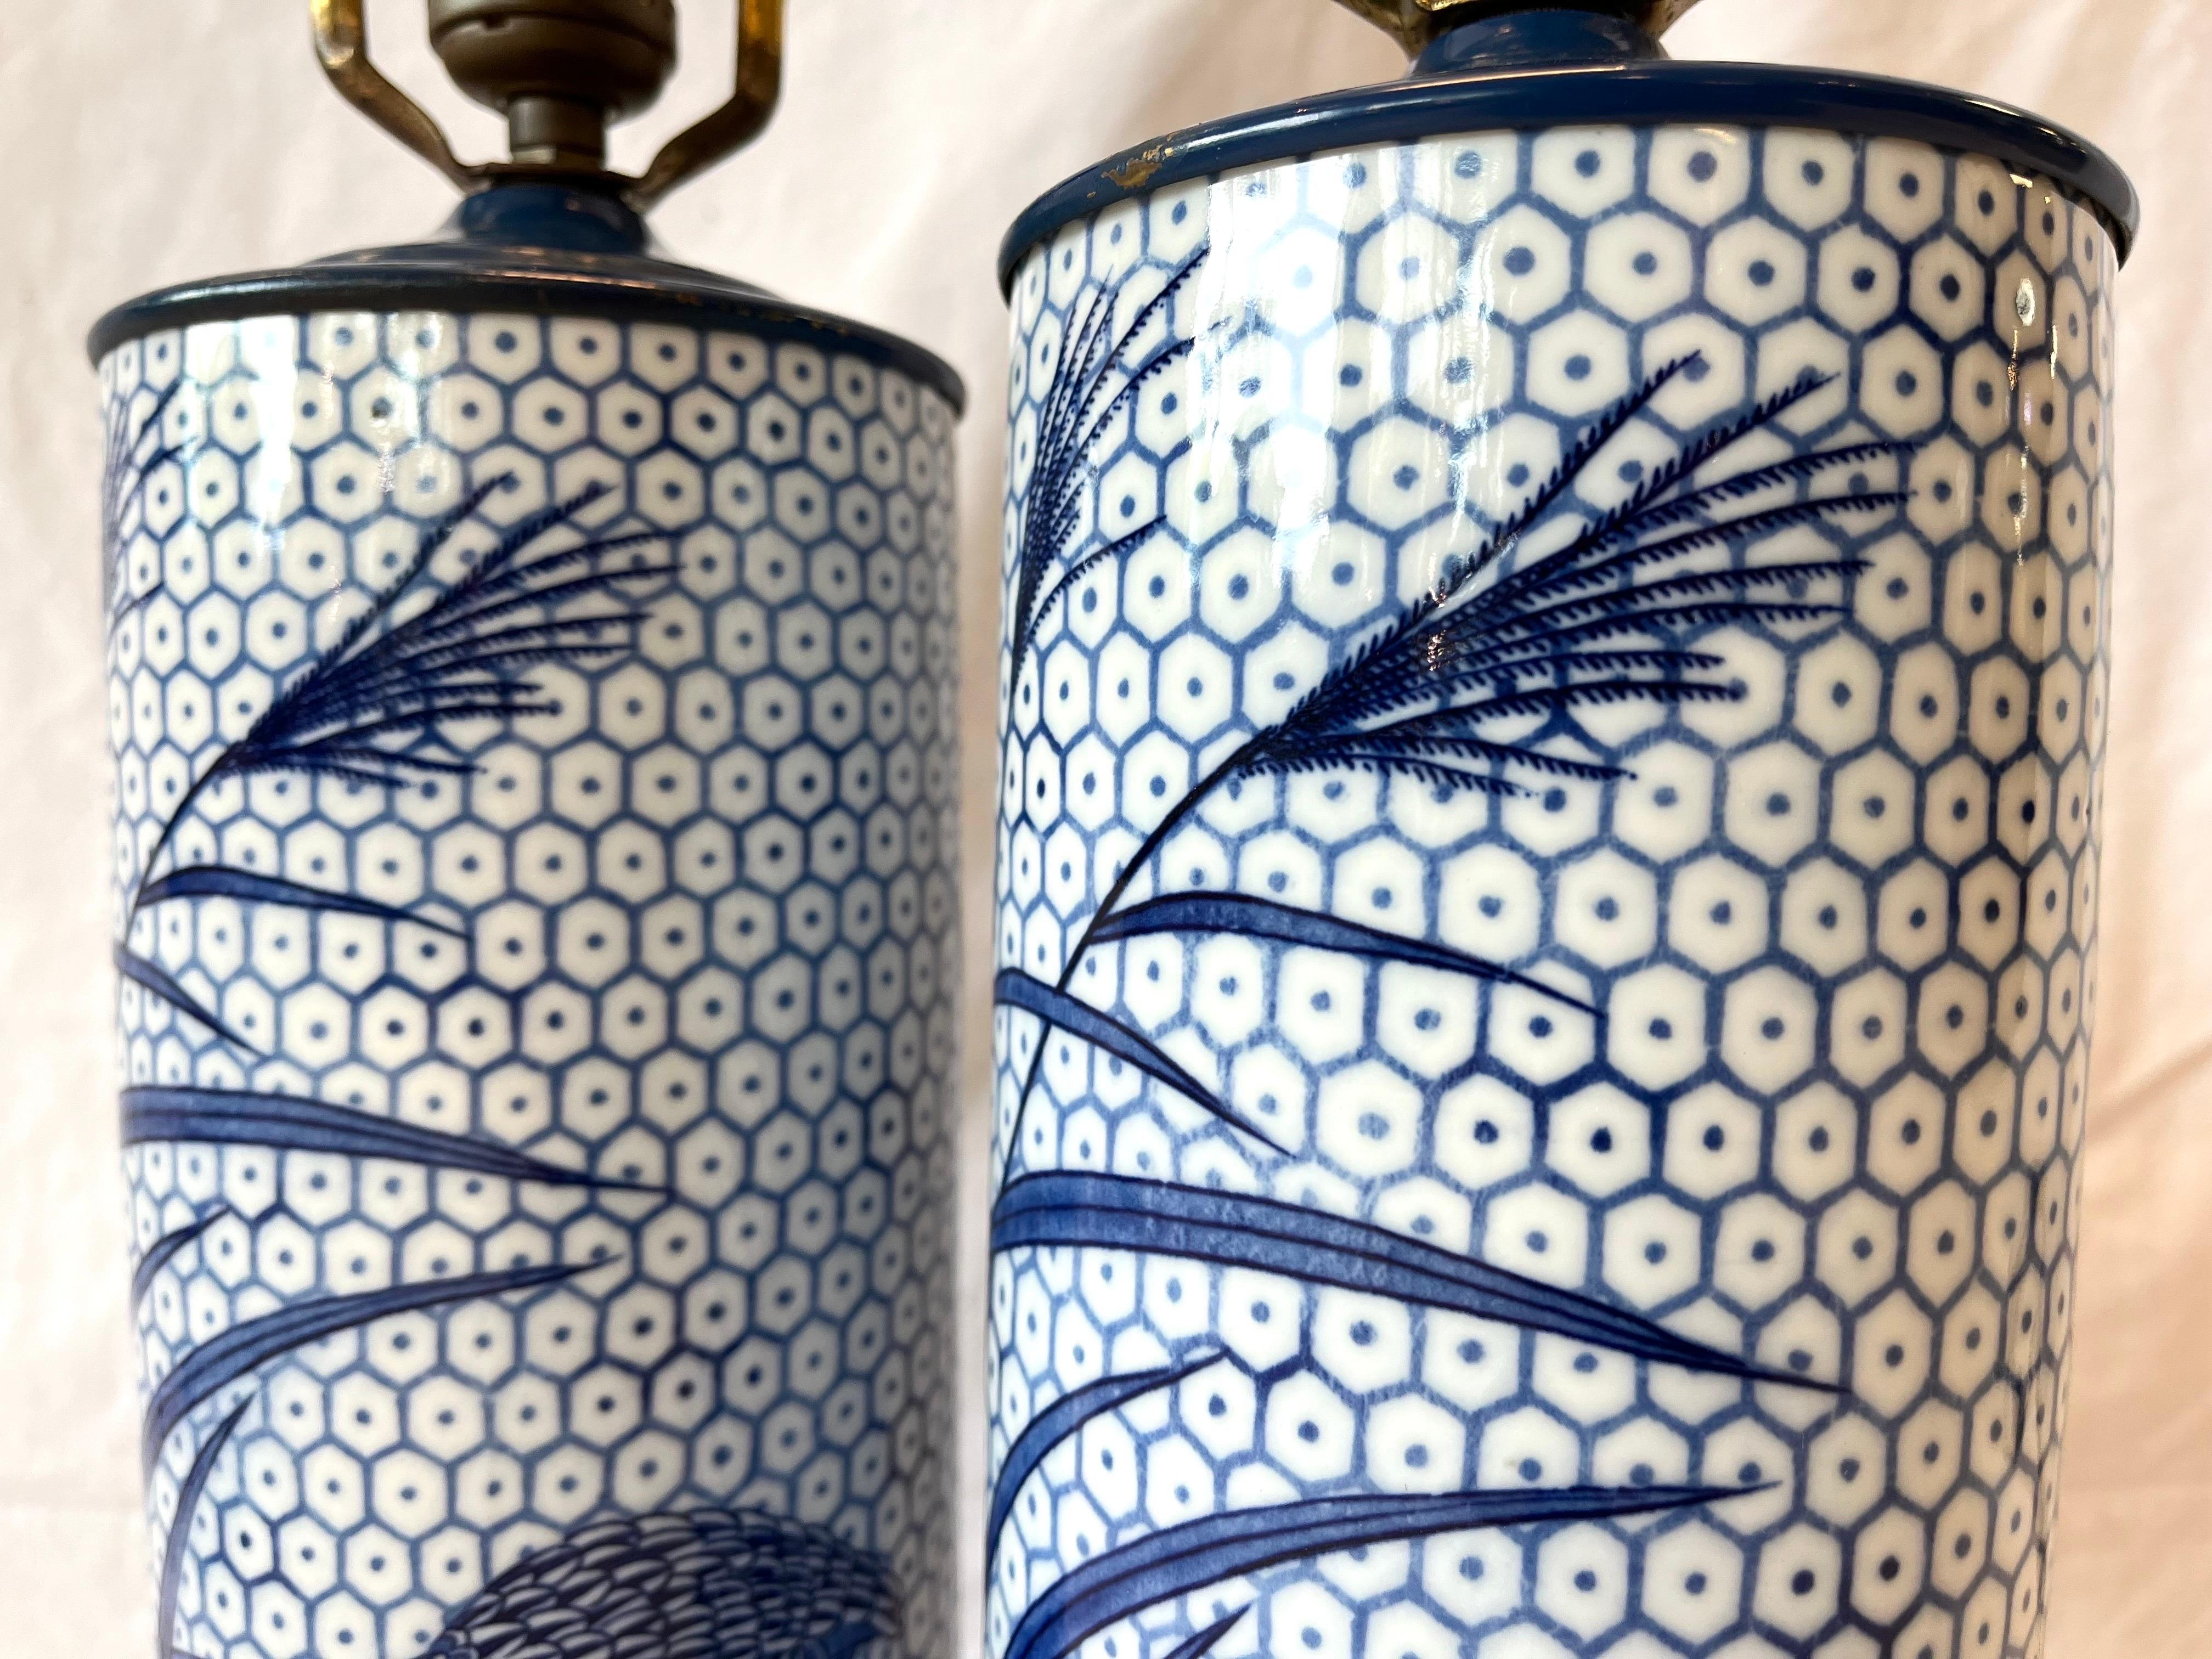 A vintage, mid 20th century era pair of blue and white cylindrical ceramic table lamps retailed by Bloomingdale's. The designer lighting department was always known as a selective and curated source for interesting and quality light fixtures.